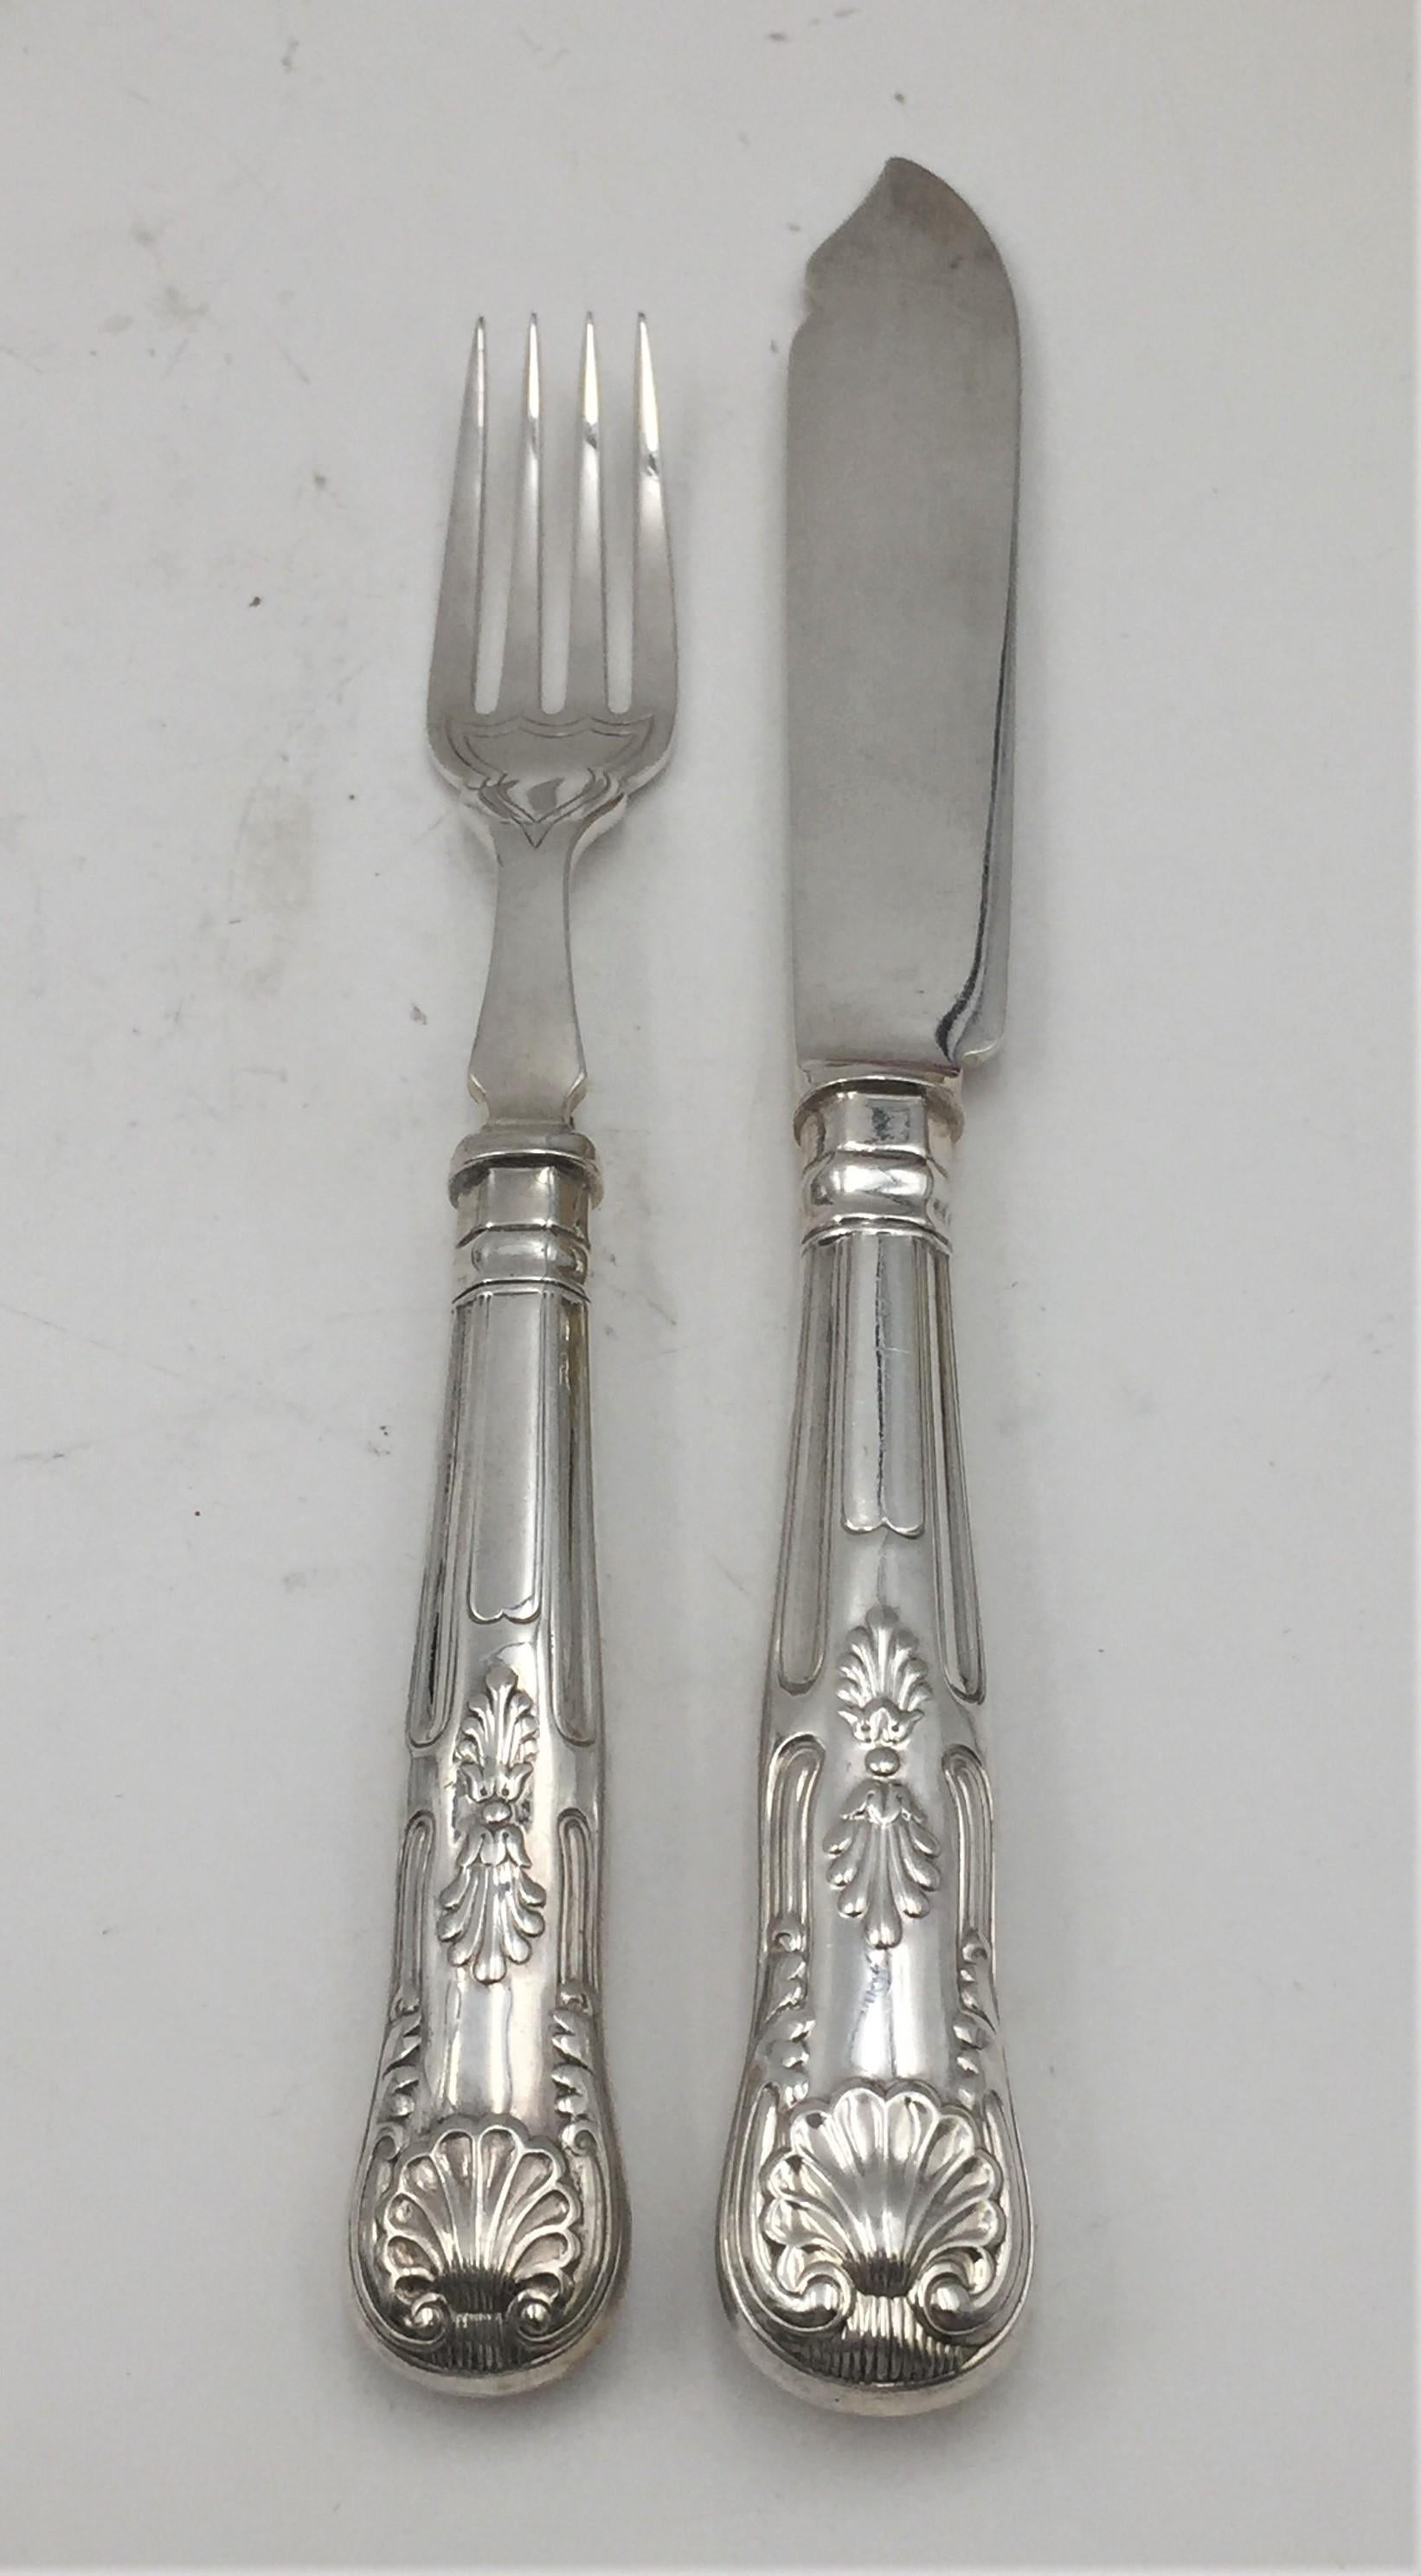 English sterling silver 24-piece fish set from 1928 with forks and knives with beautiful decoration in relief, similar stylistically and in terms of quality to Tiffany's Kings Pattern. The knives are hollow-handled (not weighted) and measure 8 1/2''